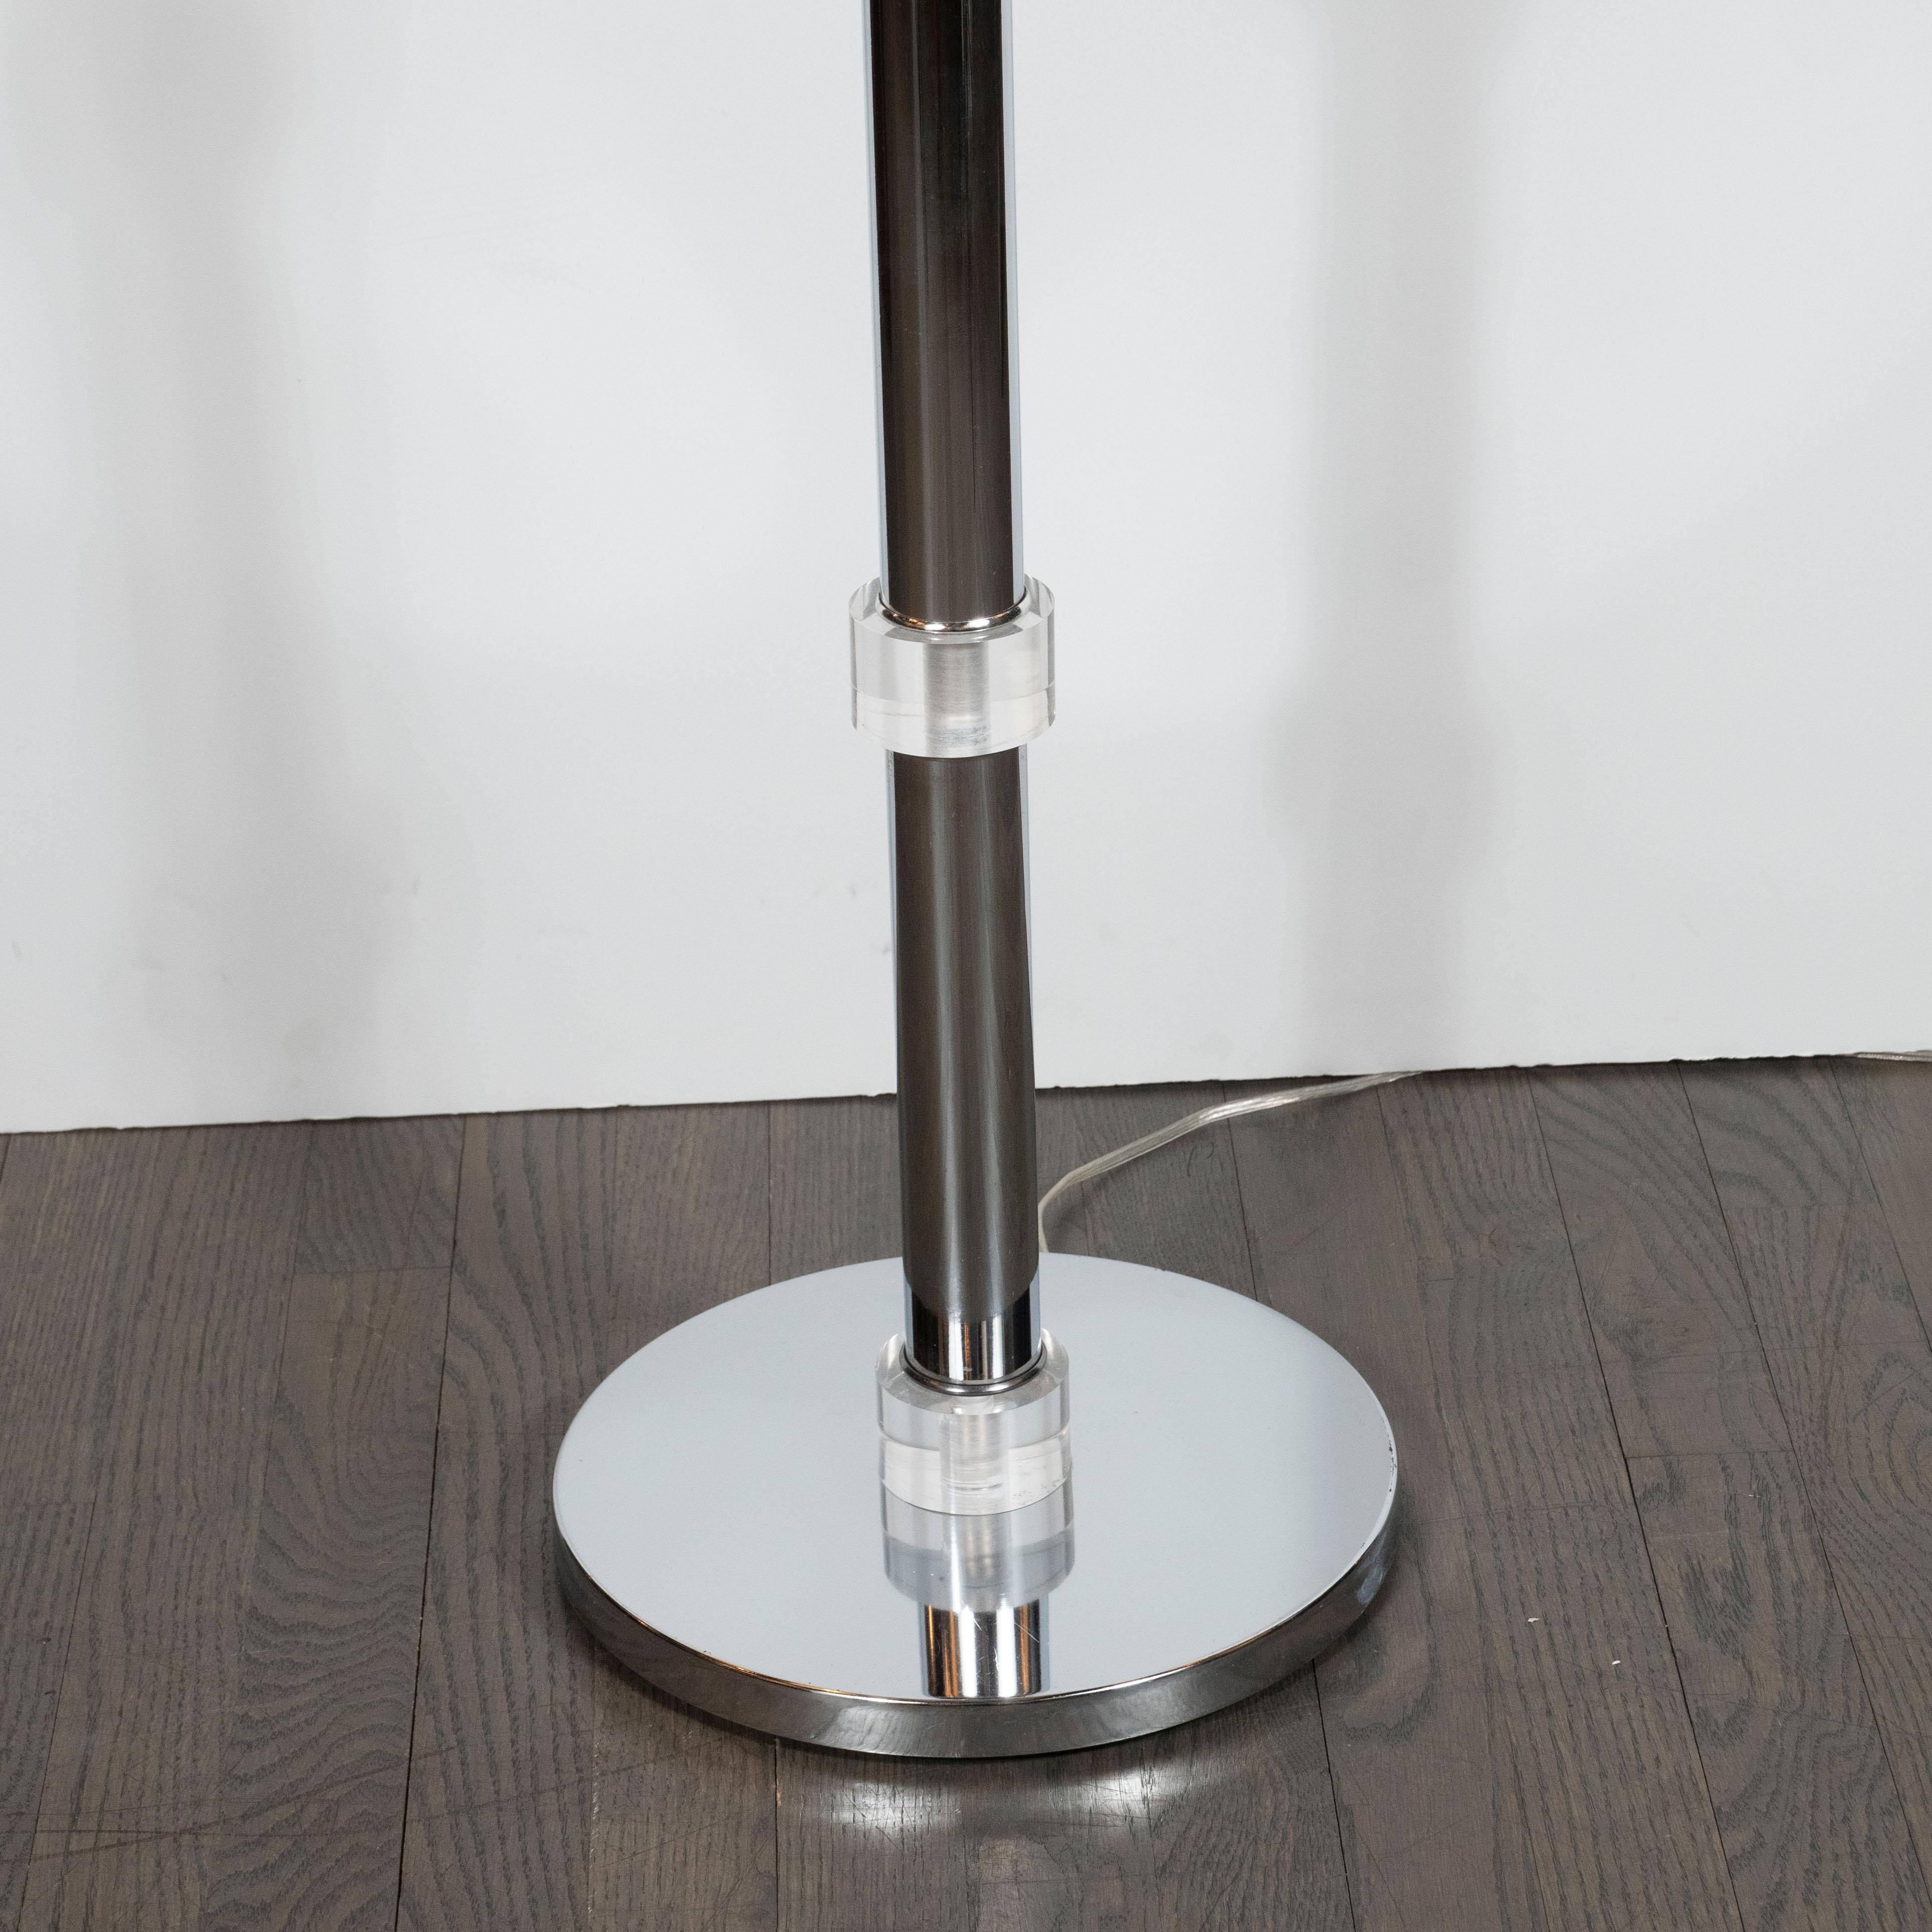 This refined floor lamp was realized in the United States, circa 1970. It features a cylindrical polished chrome body banded in four places with Lucite embellishments in the same shape. The lamp rests on a circular chrome base, and comes fitted with